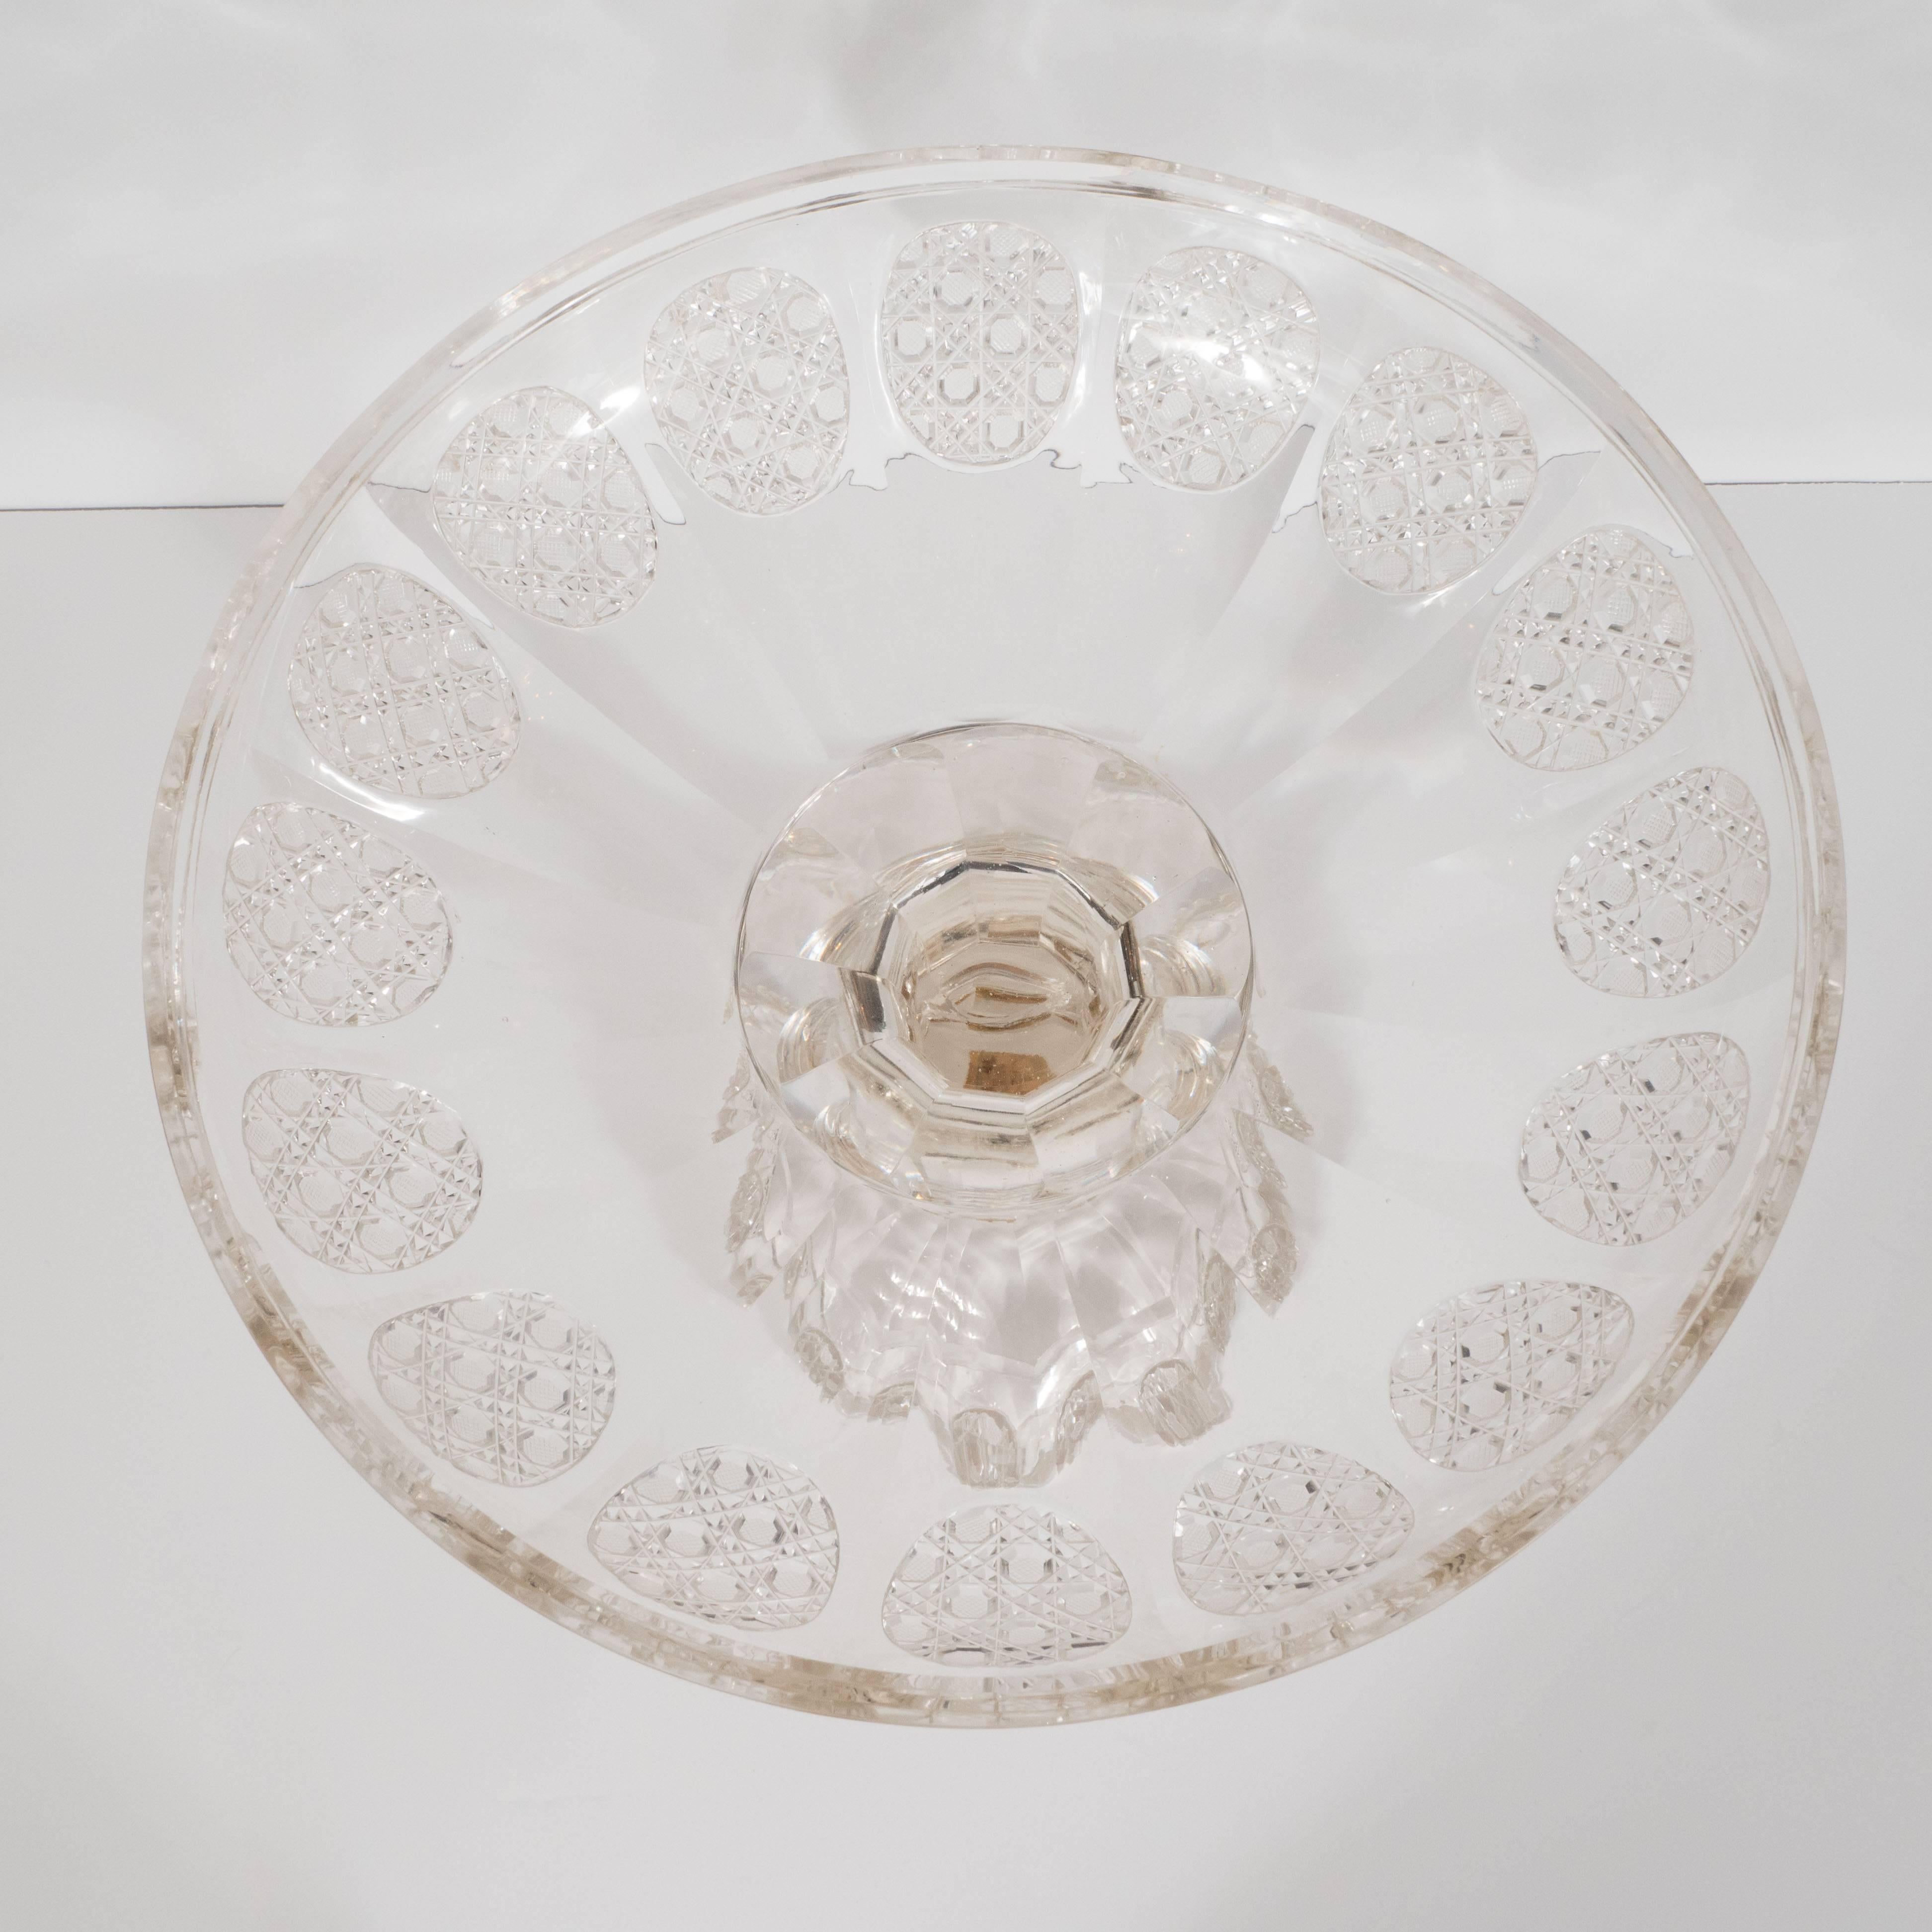 Early 20th Century Art Deco Cut Crystal Footed Bowl with Etched Geometric Designs